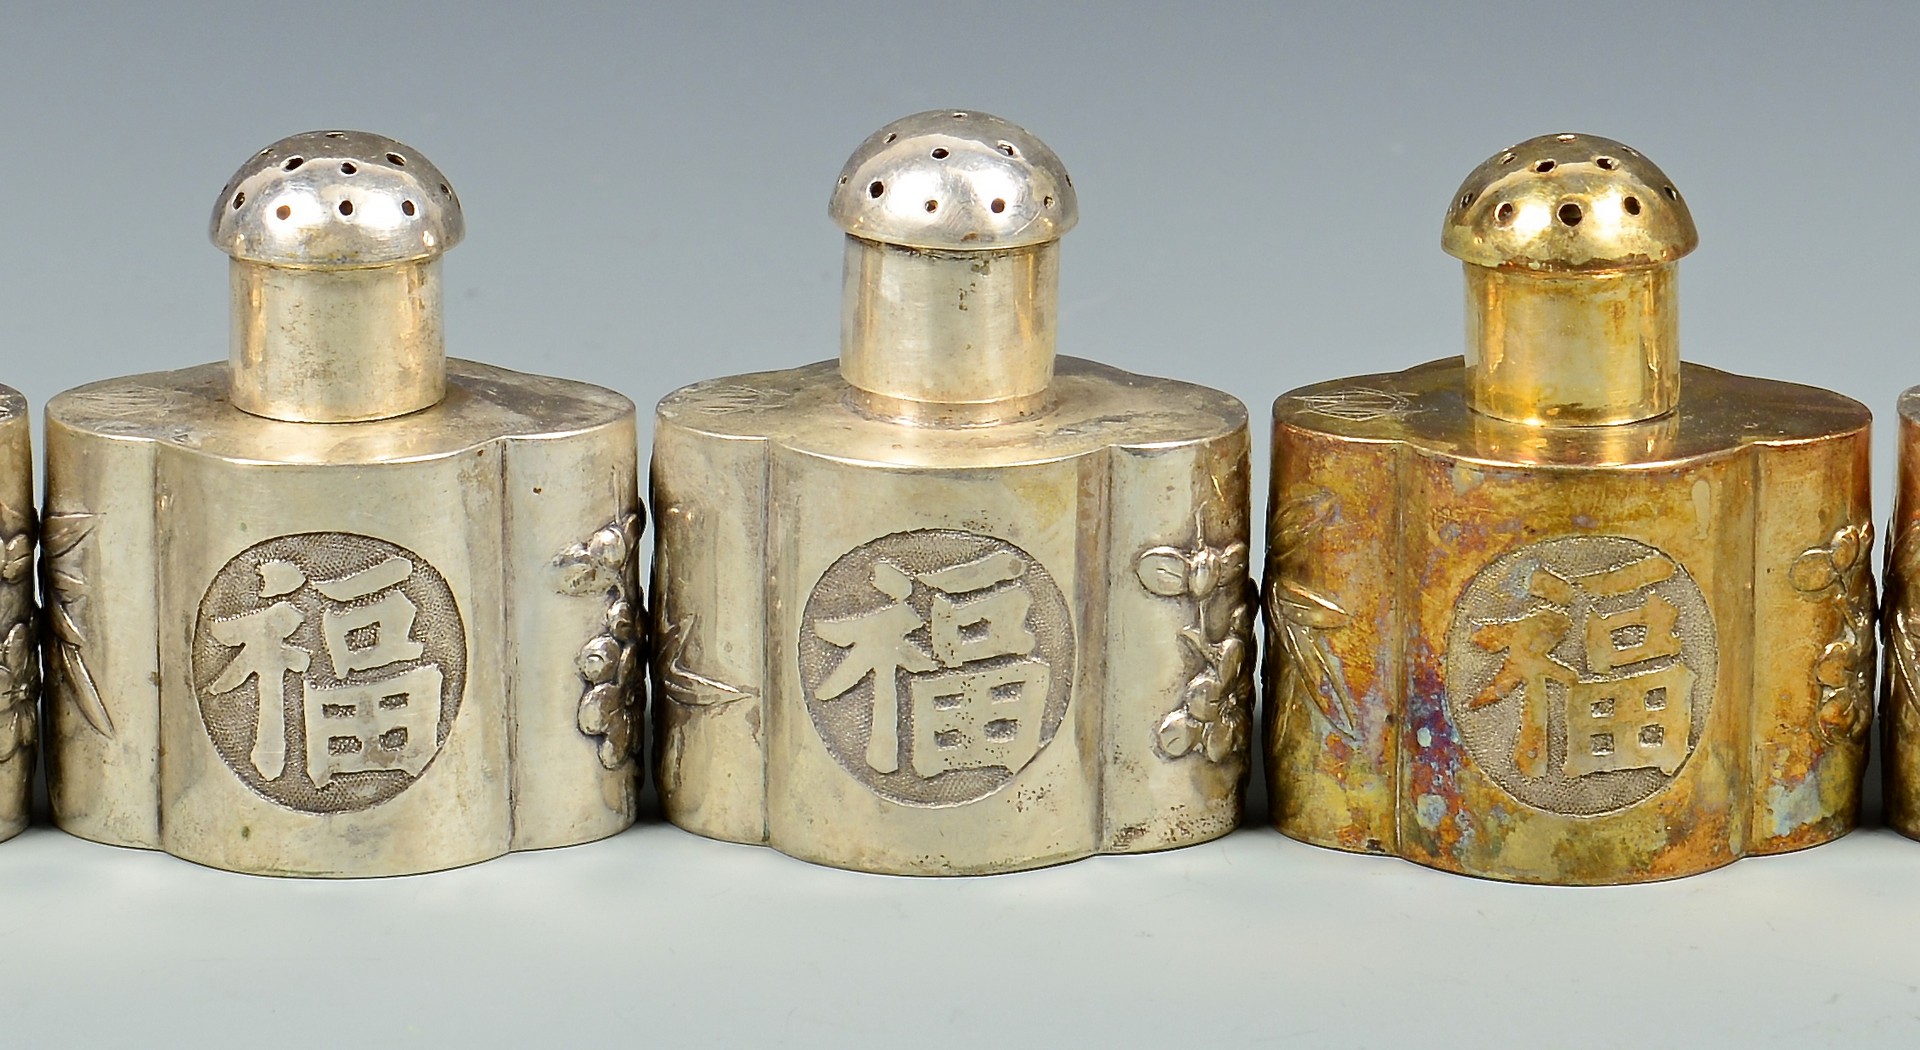 Lot 32: 12 Chinese Export Silver Novelties